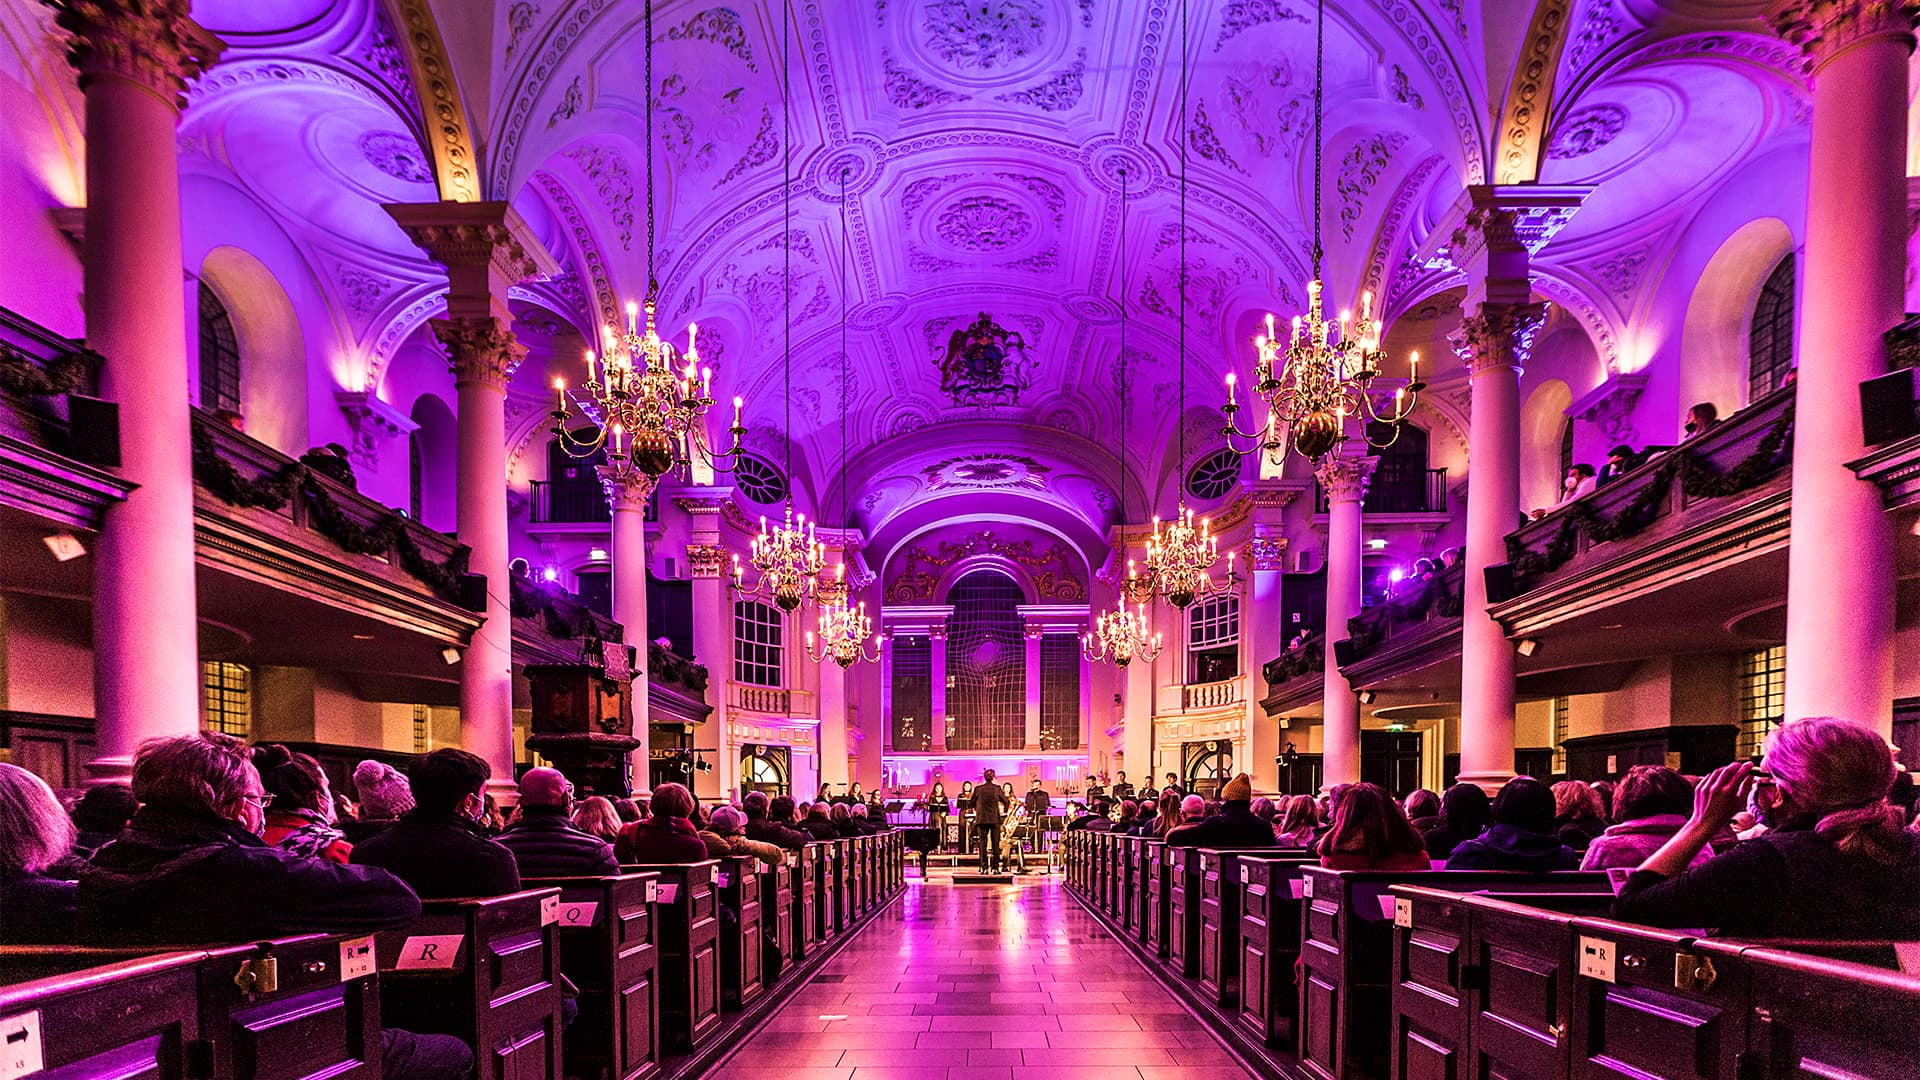 Interior of cathedral for the Candlelight London event